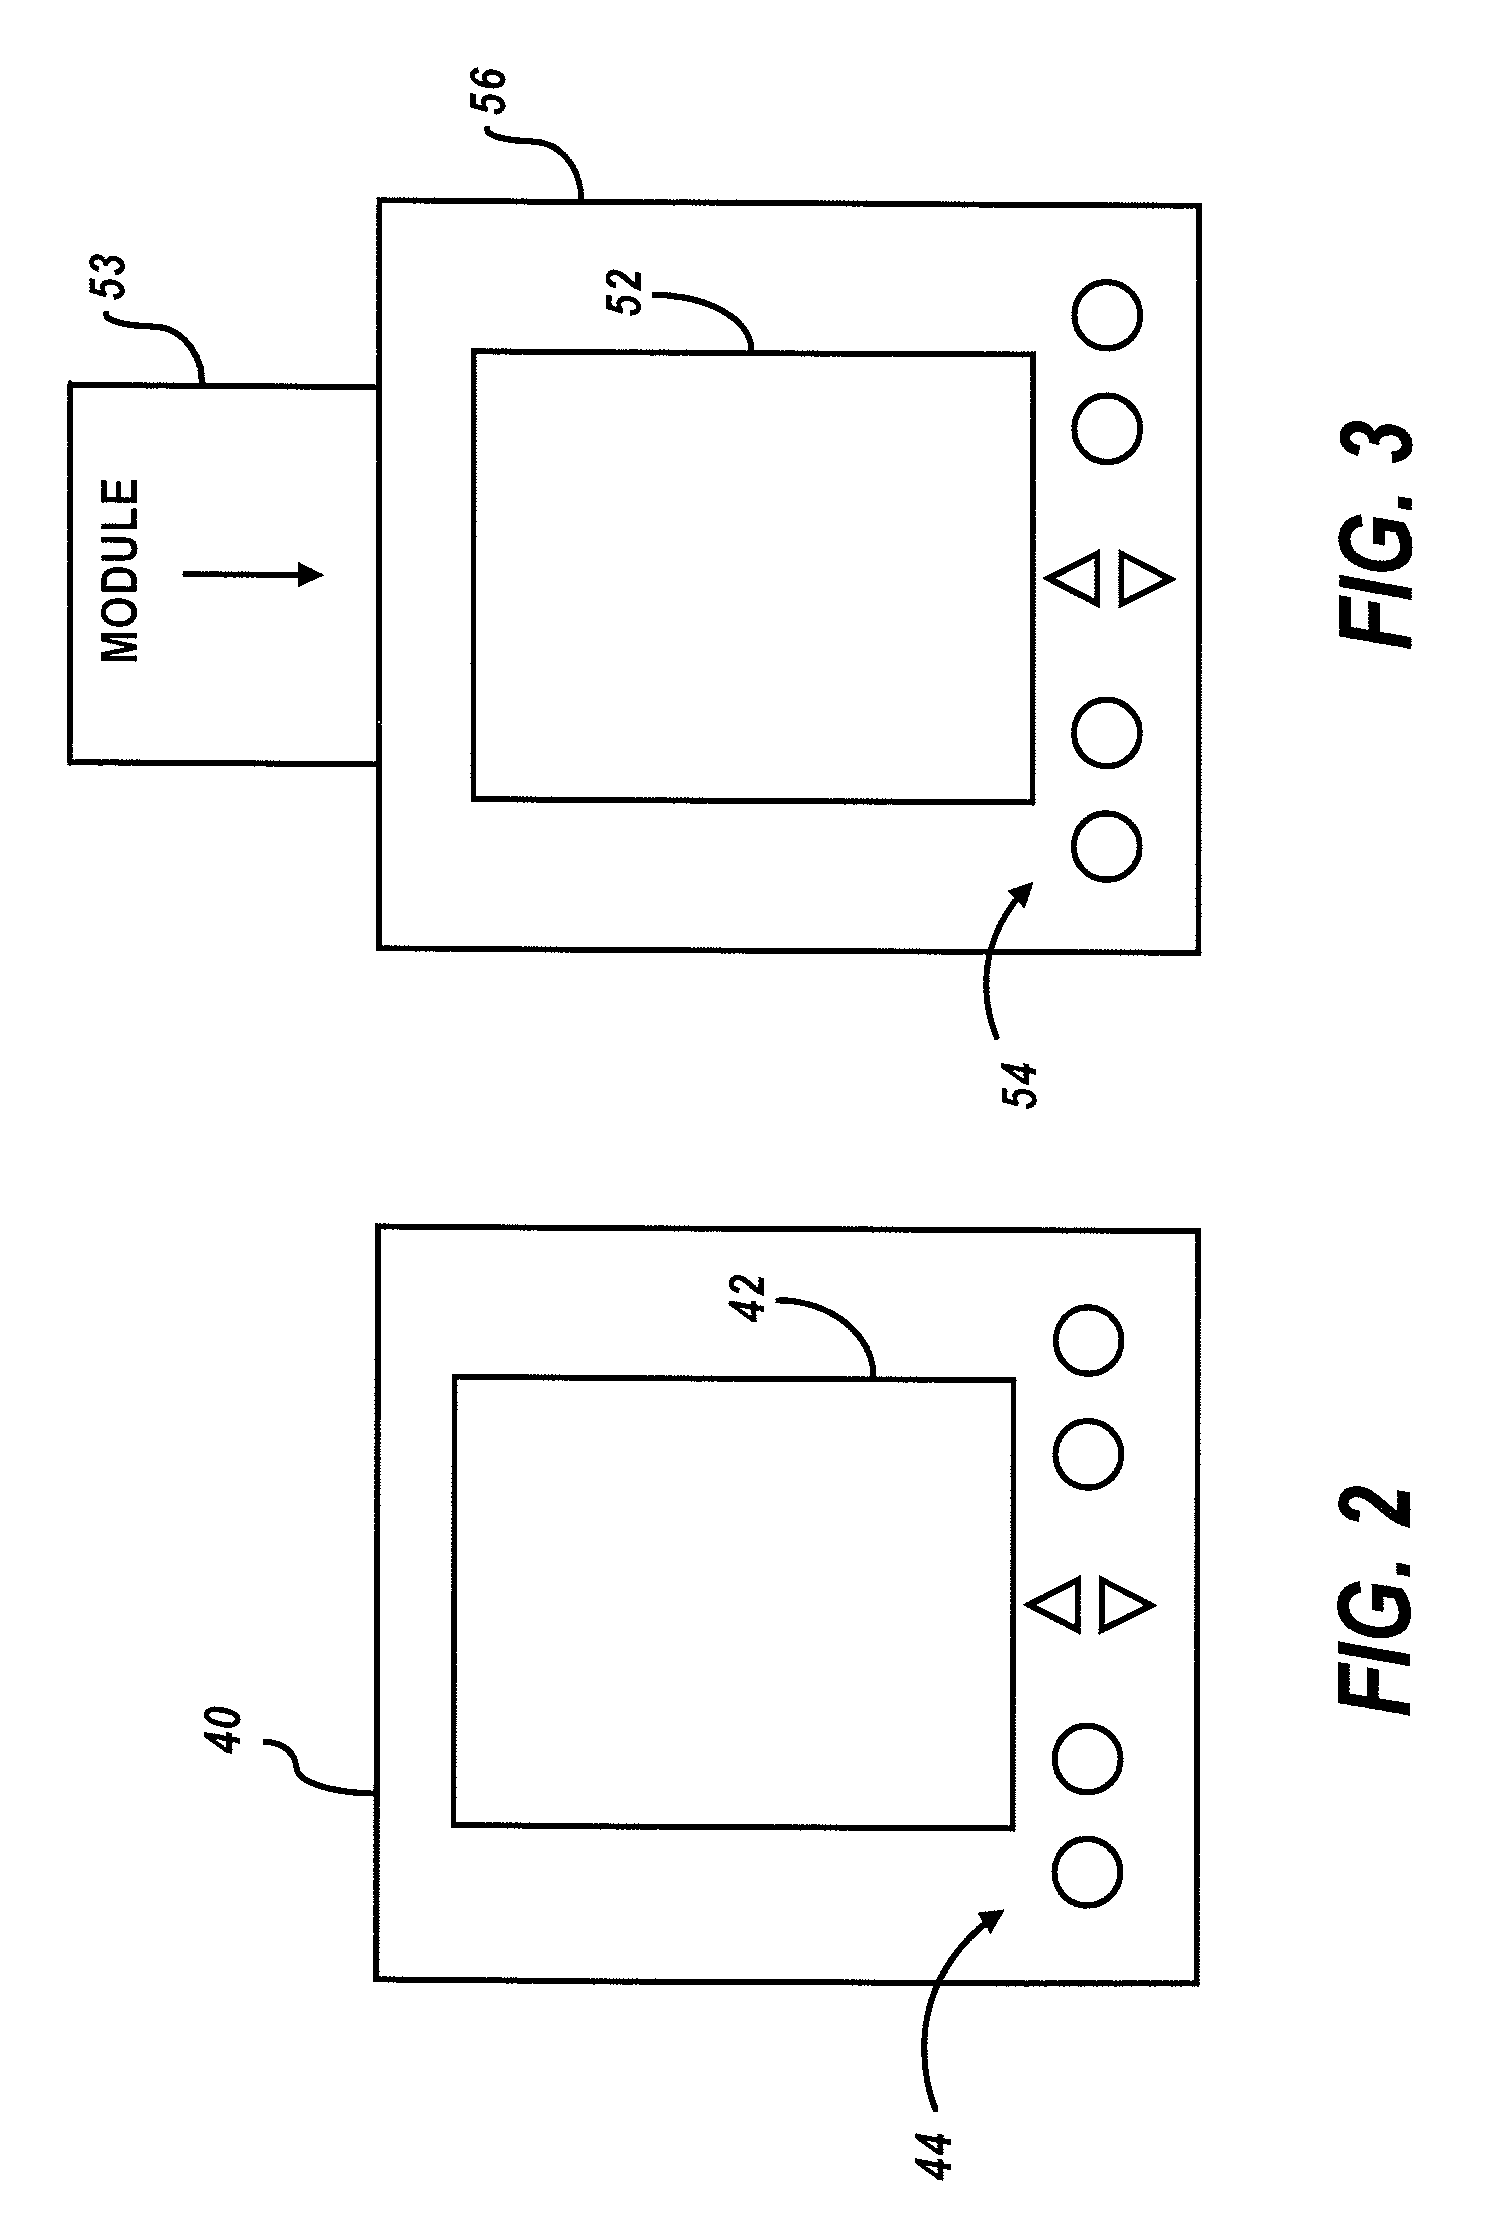 In-play camera associated with headgear used in sporting events and configured to provide wireless transmission of captured video for broadcast to and display at remote video monitors